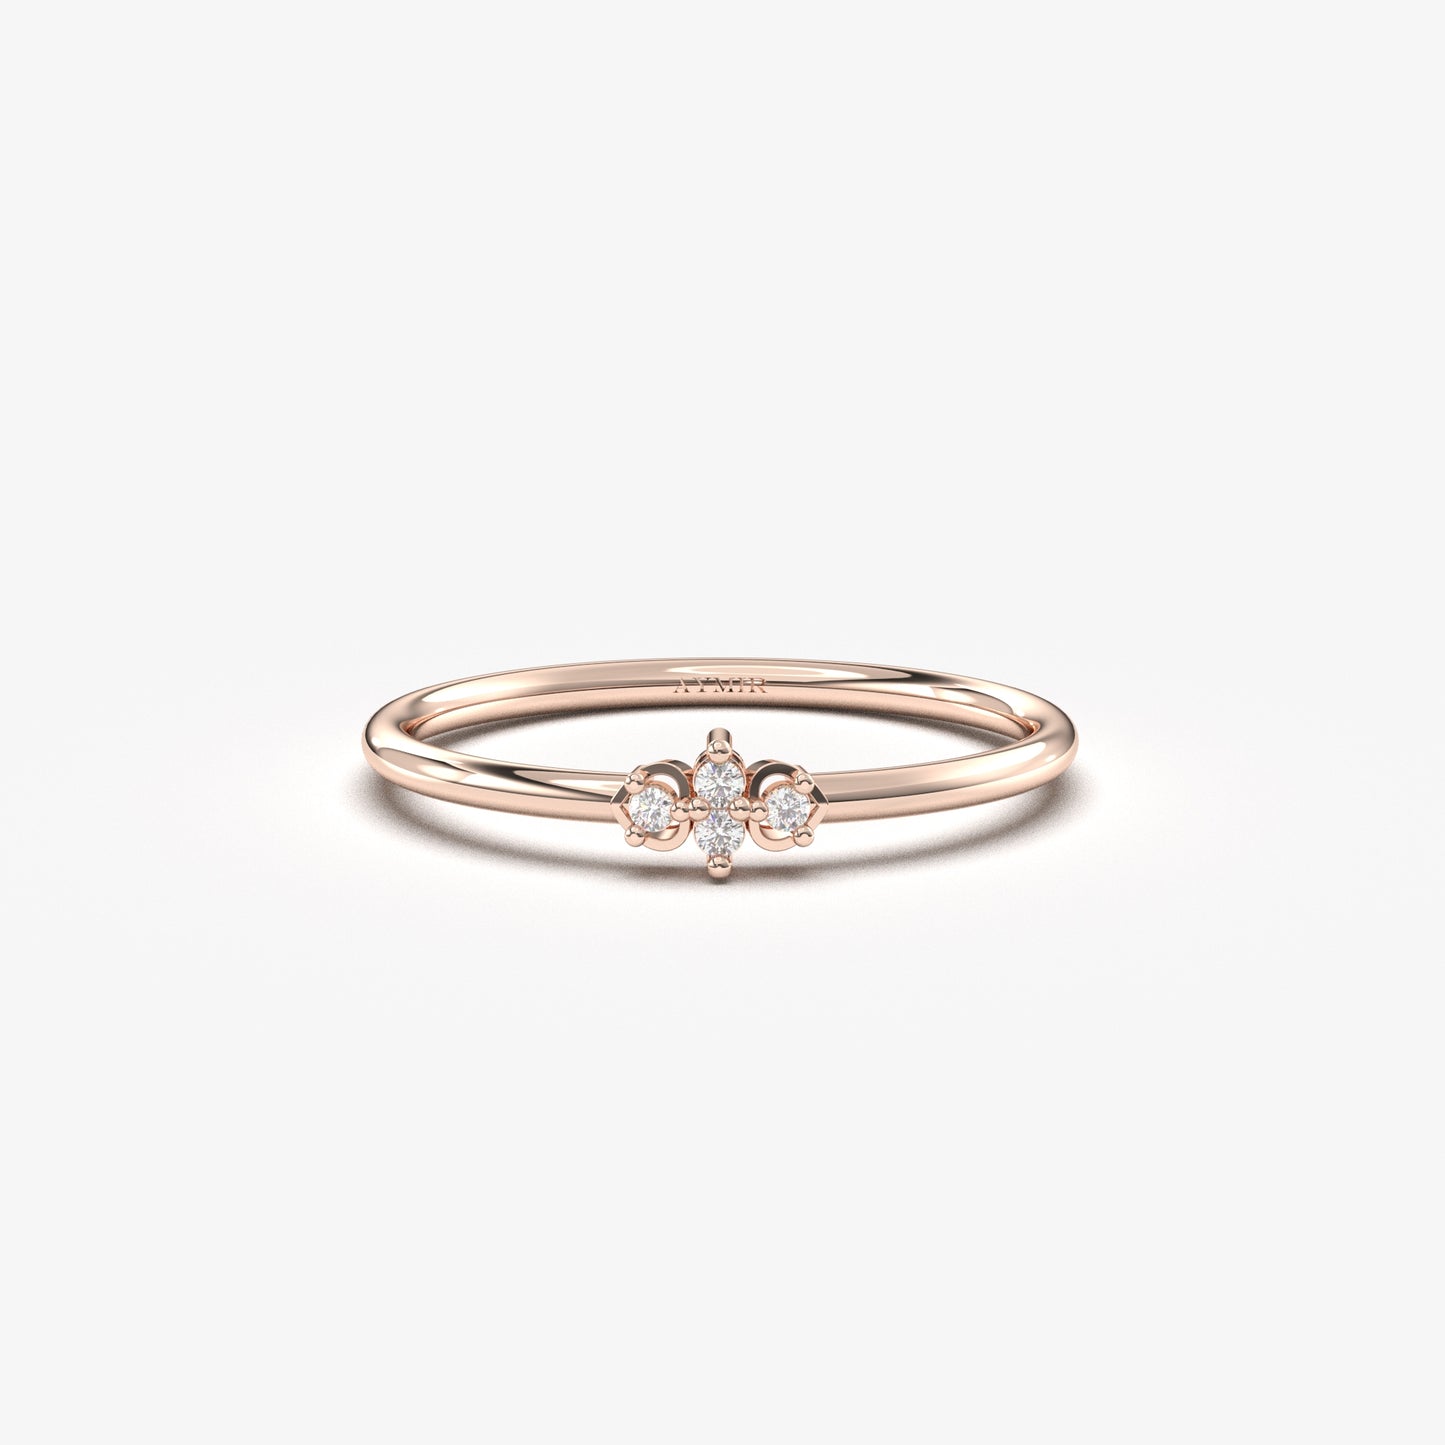 14K Solid Gold Stacking Ring - 2S193